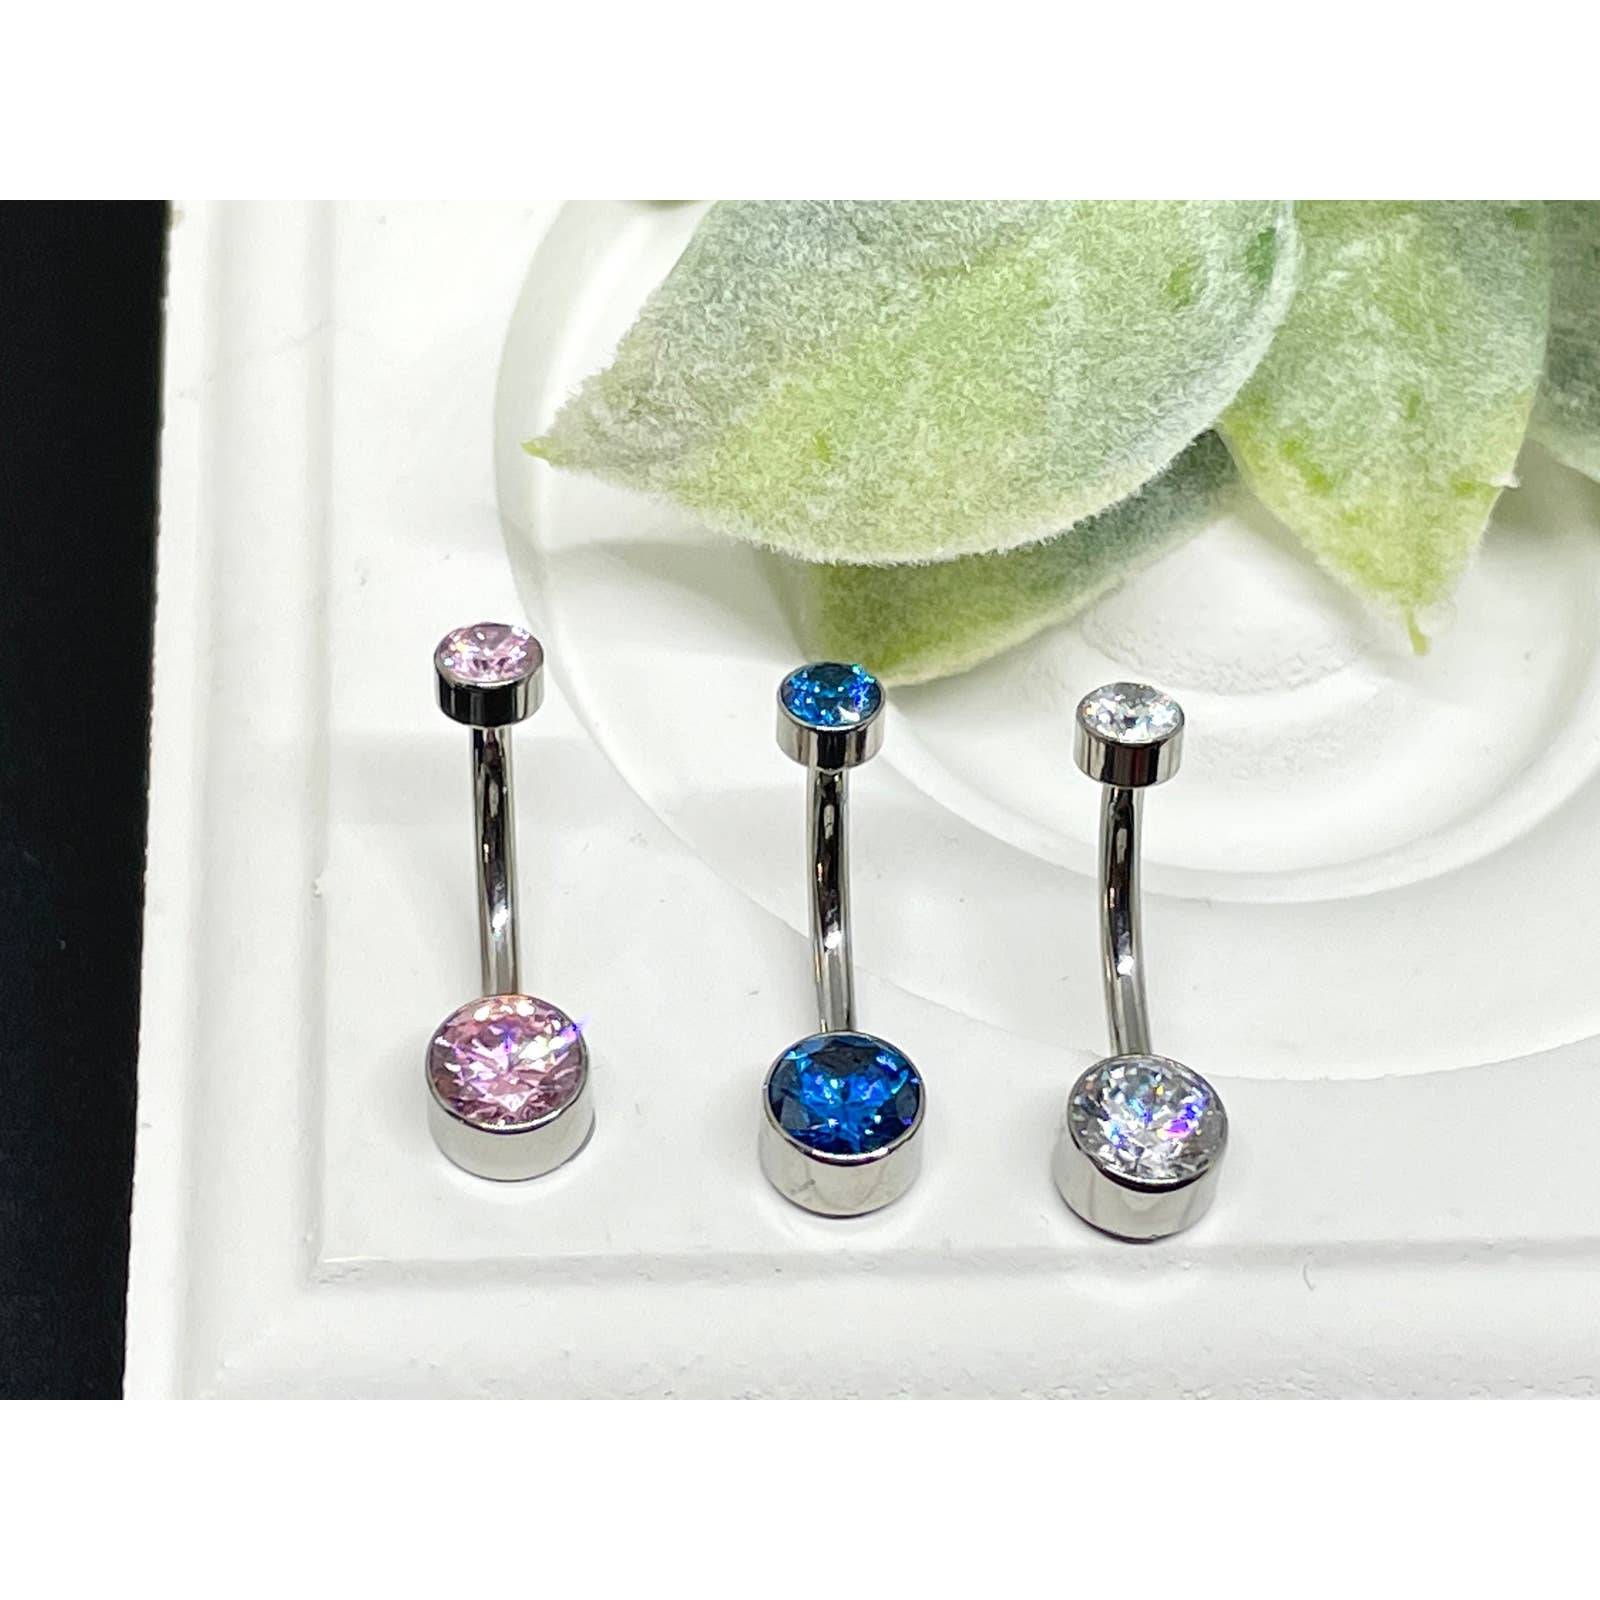 Implant Grade Titanium Belly Ring - Belly Button Ring